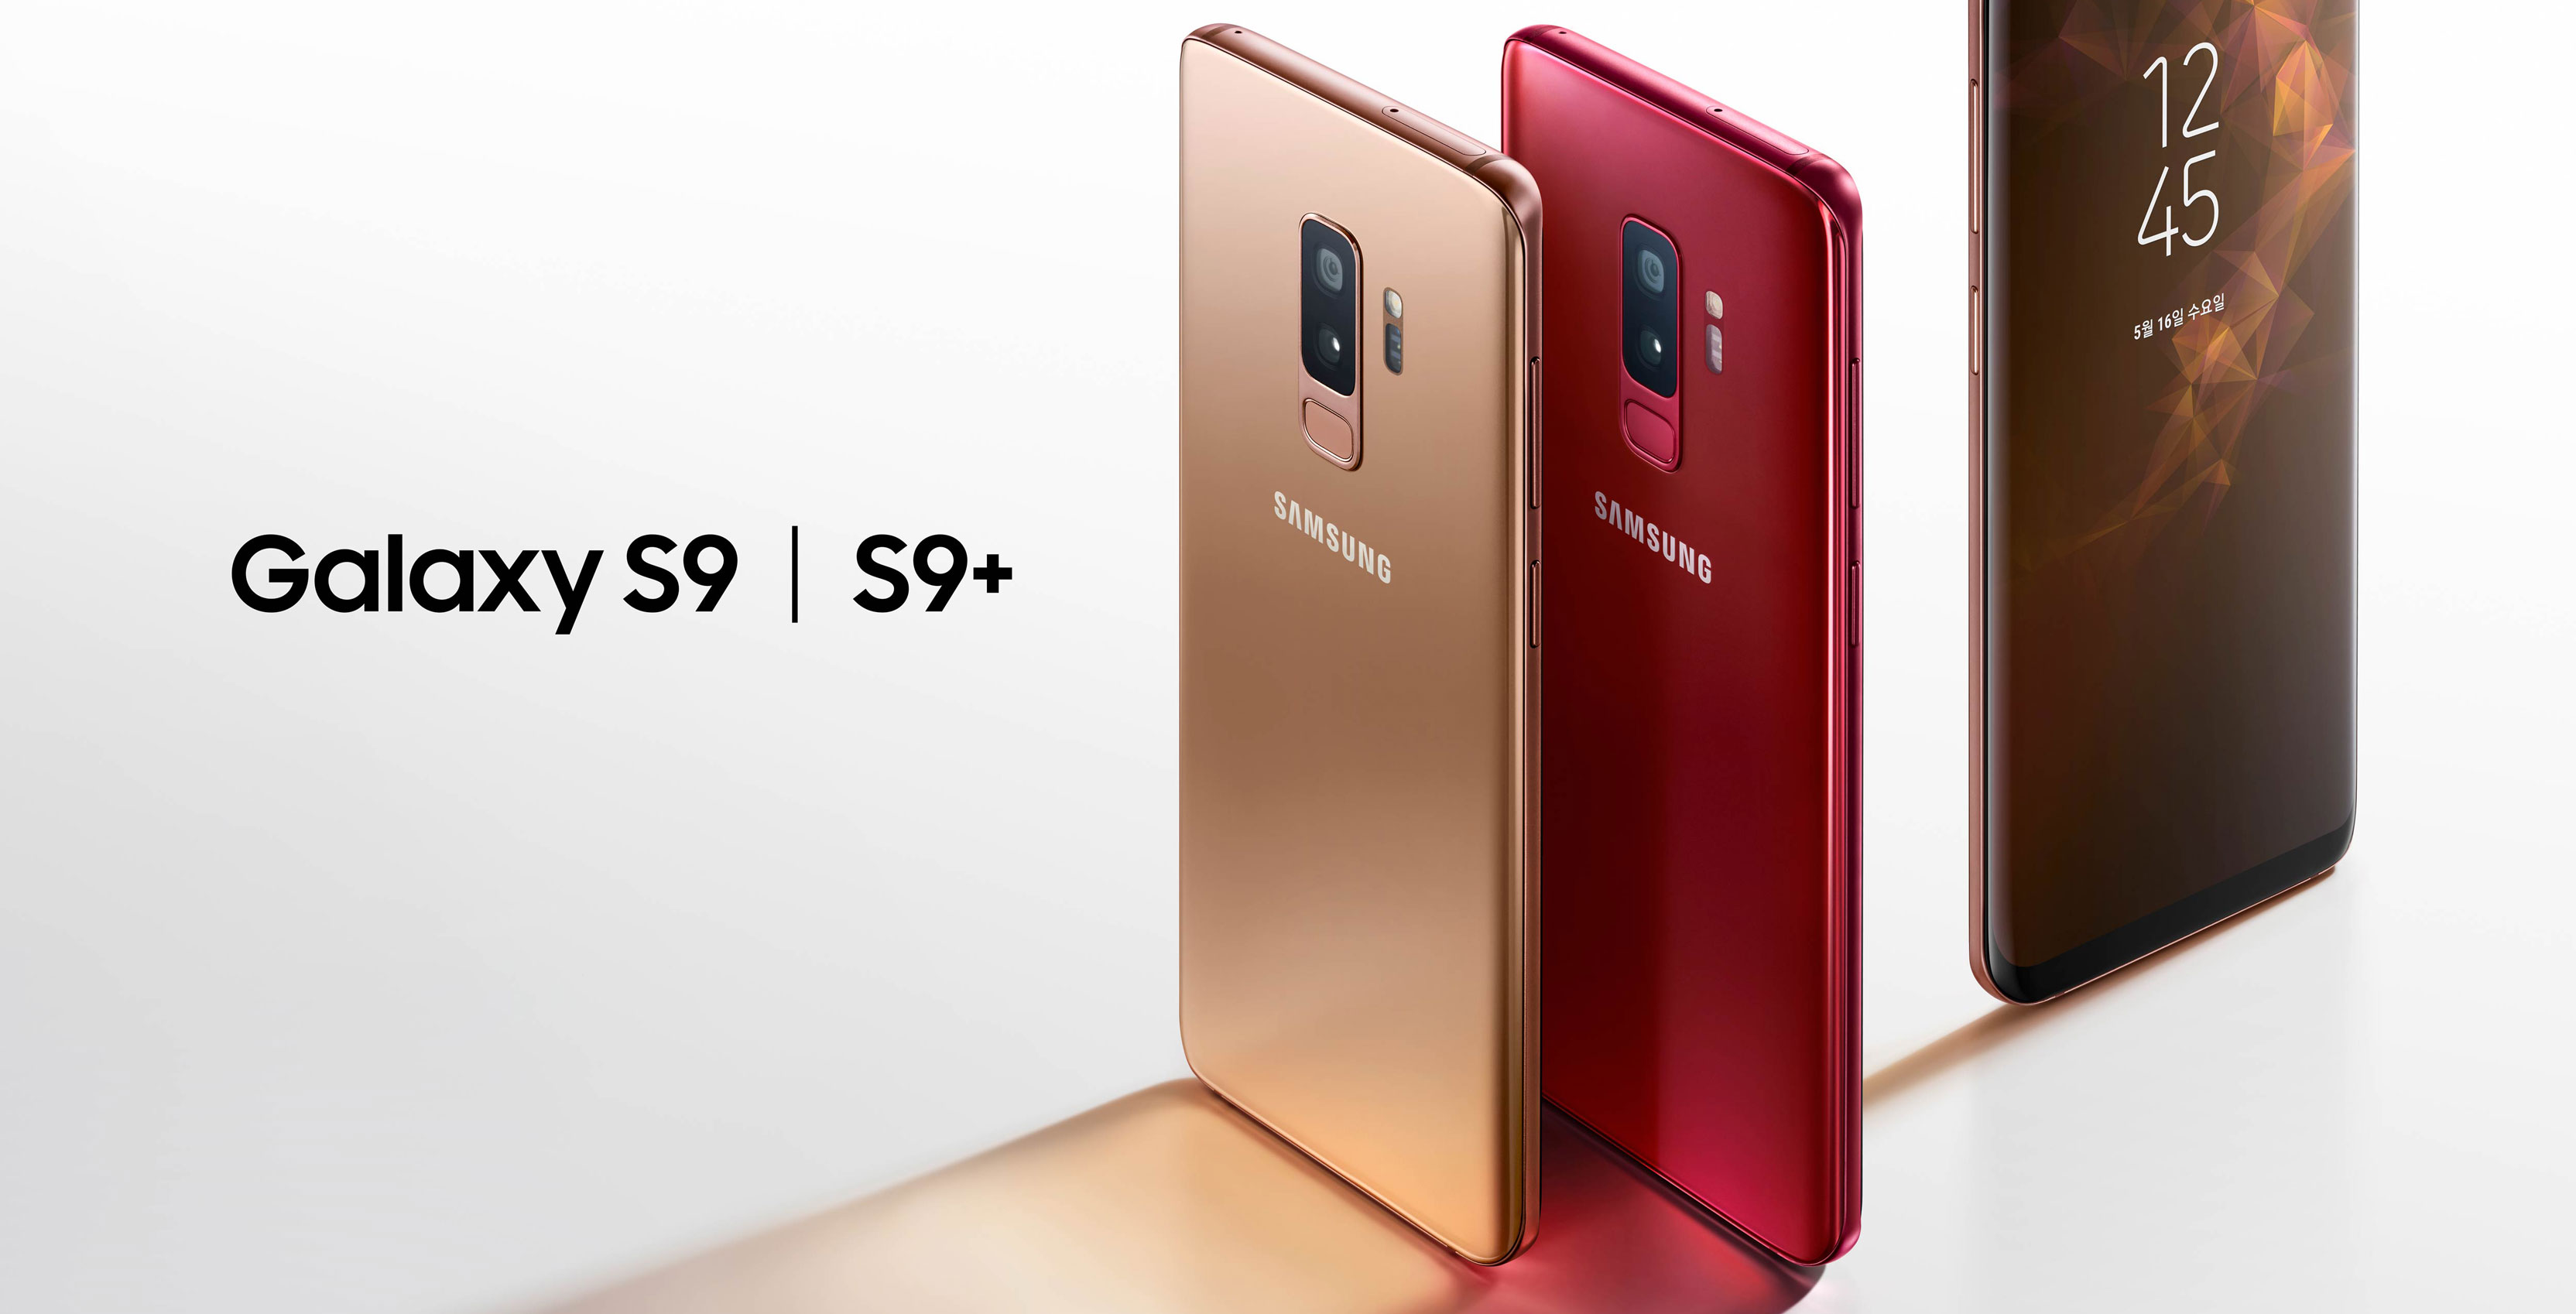 Samsung Galaxy S9 and S9+ in new Sunrise Gold and Burgundy Red colours